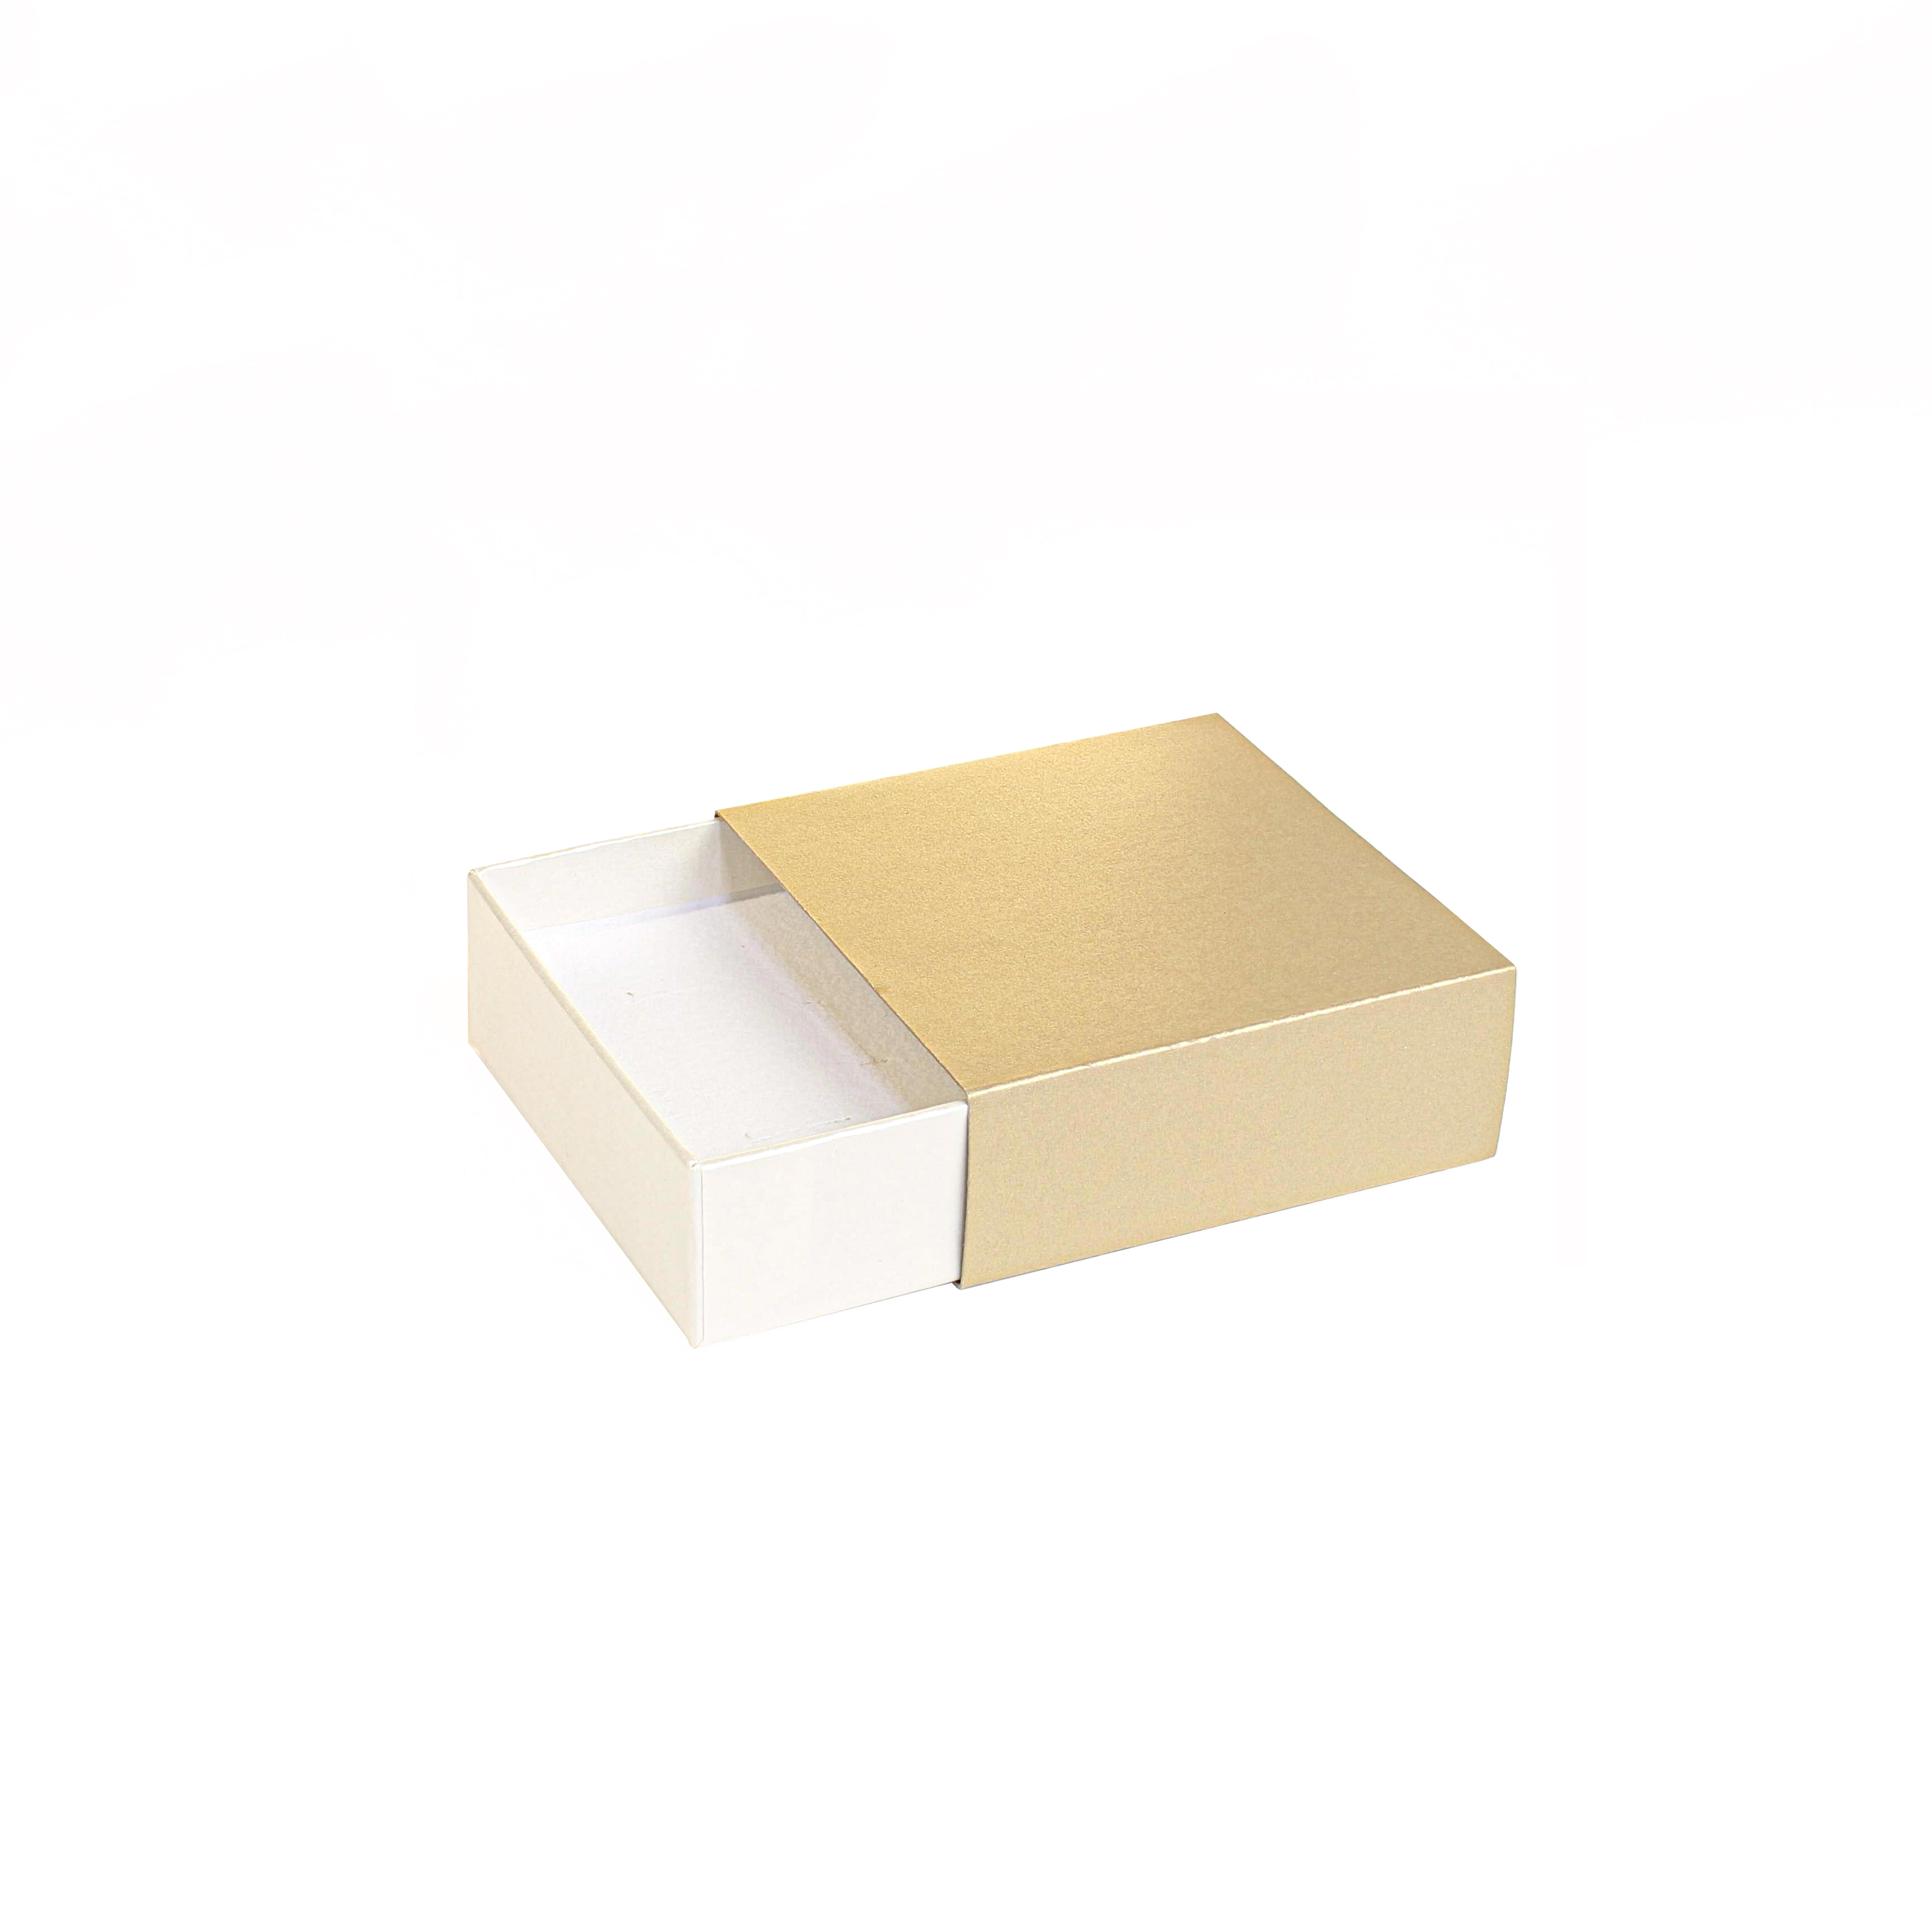 Two-tone pearlescent matchbox style jewellery presentation boxes